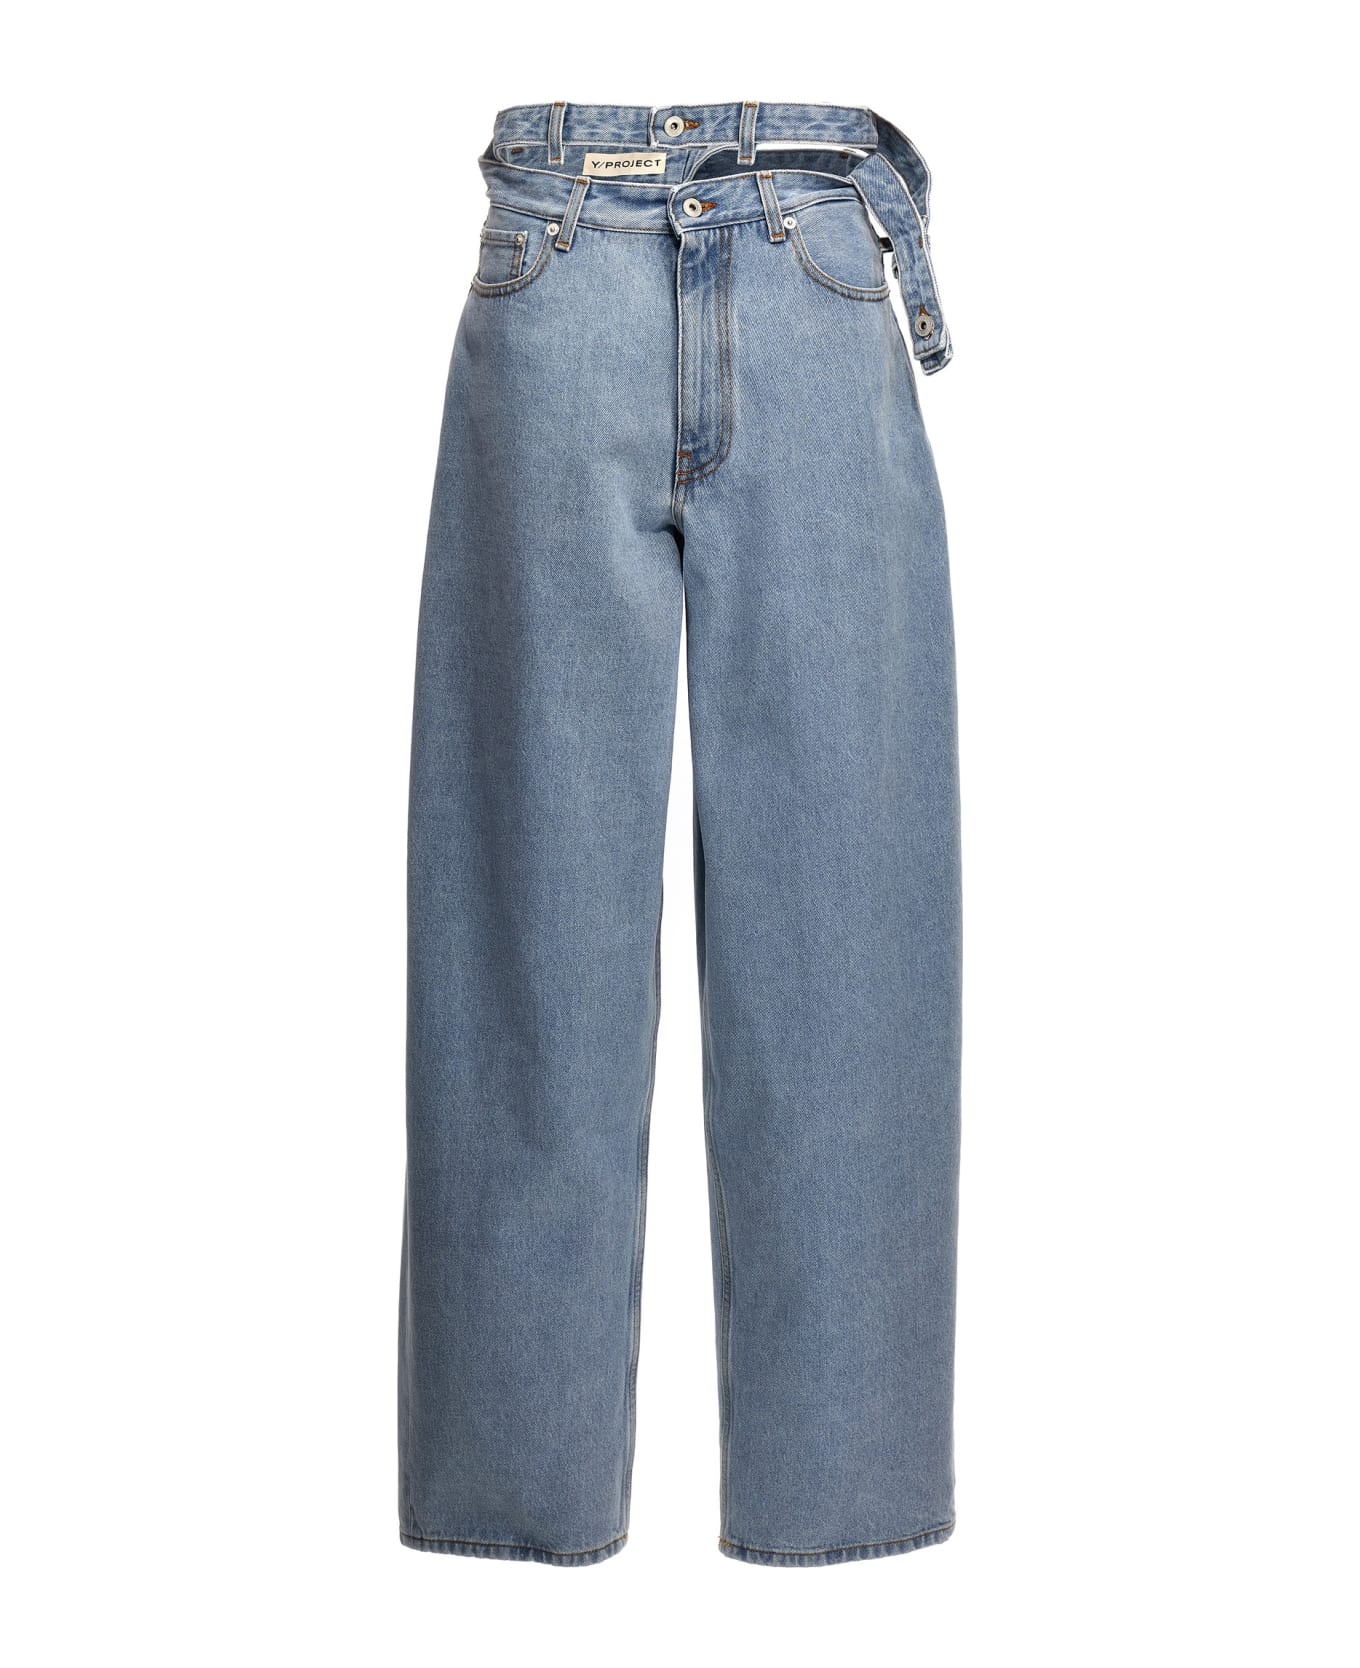 Y/Project 'evergreen' Jeans - Light Blue